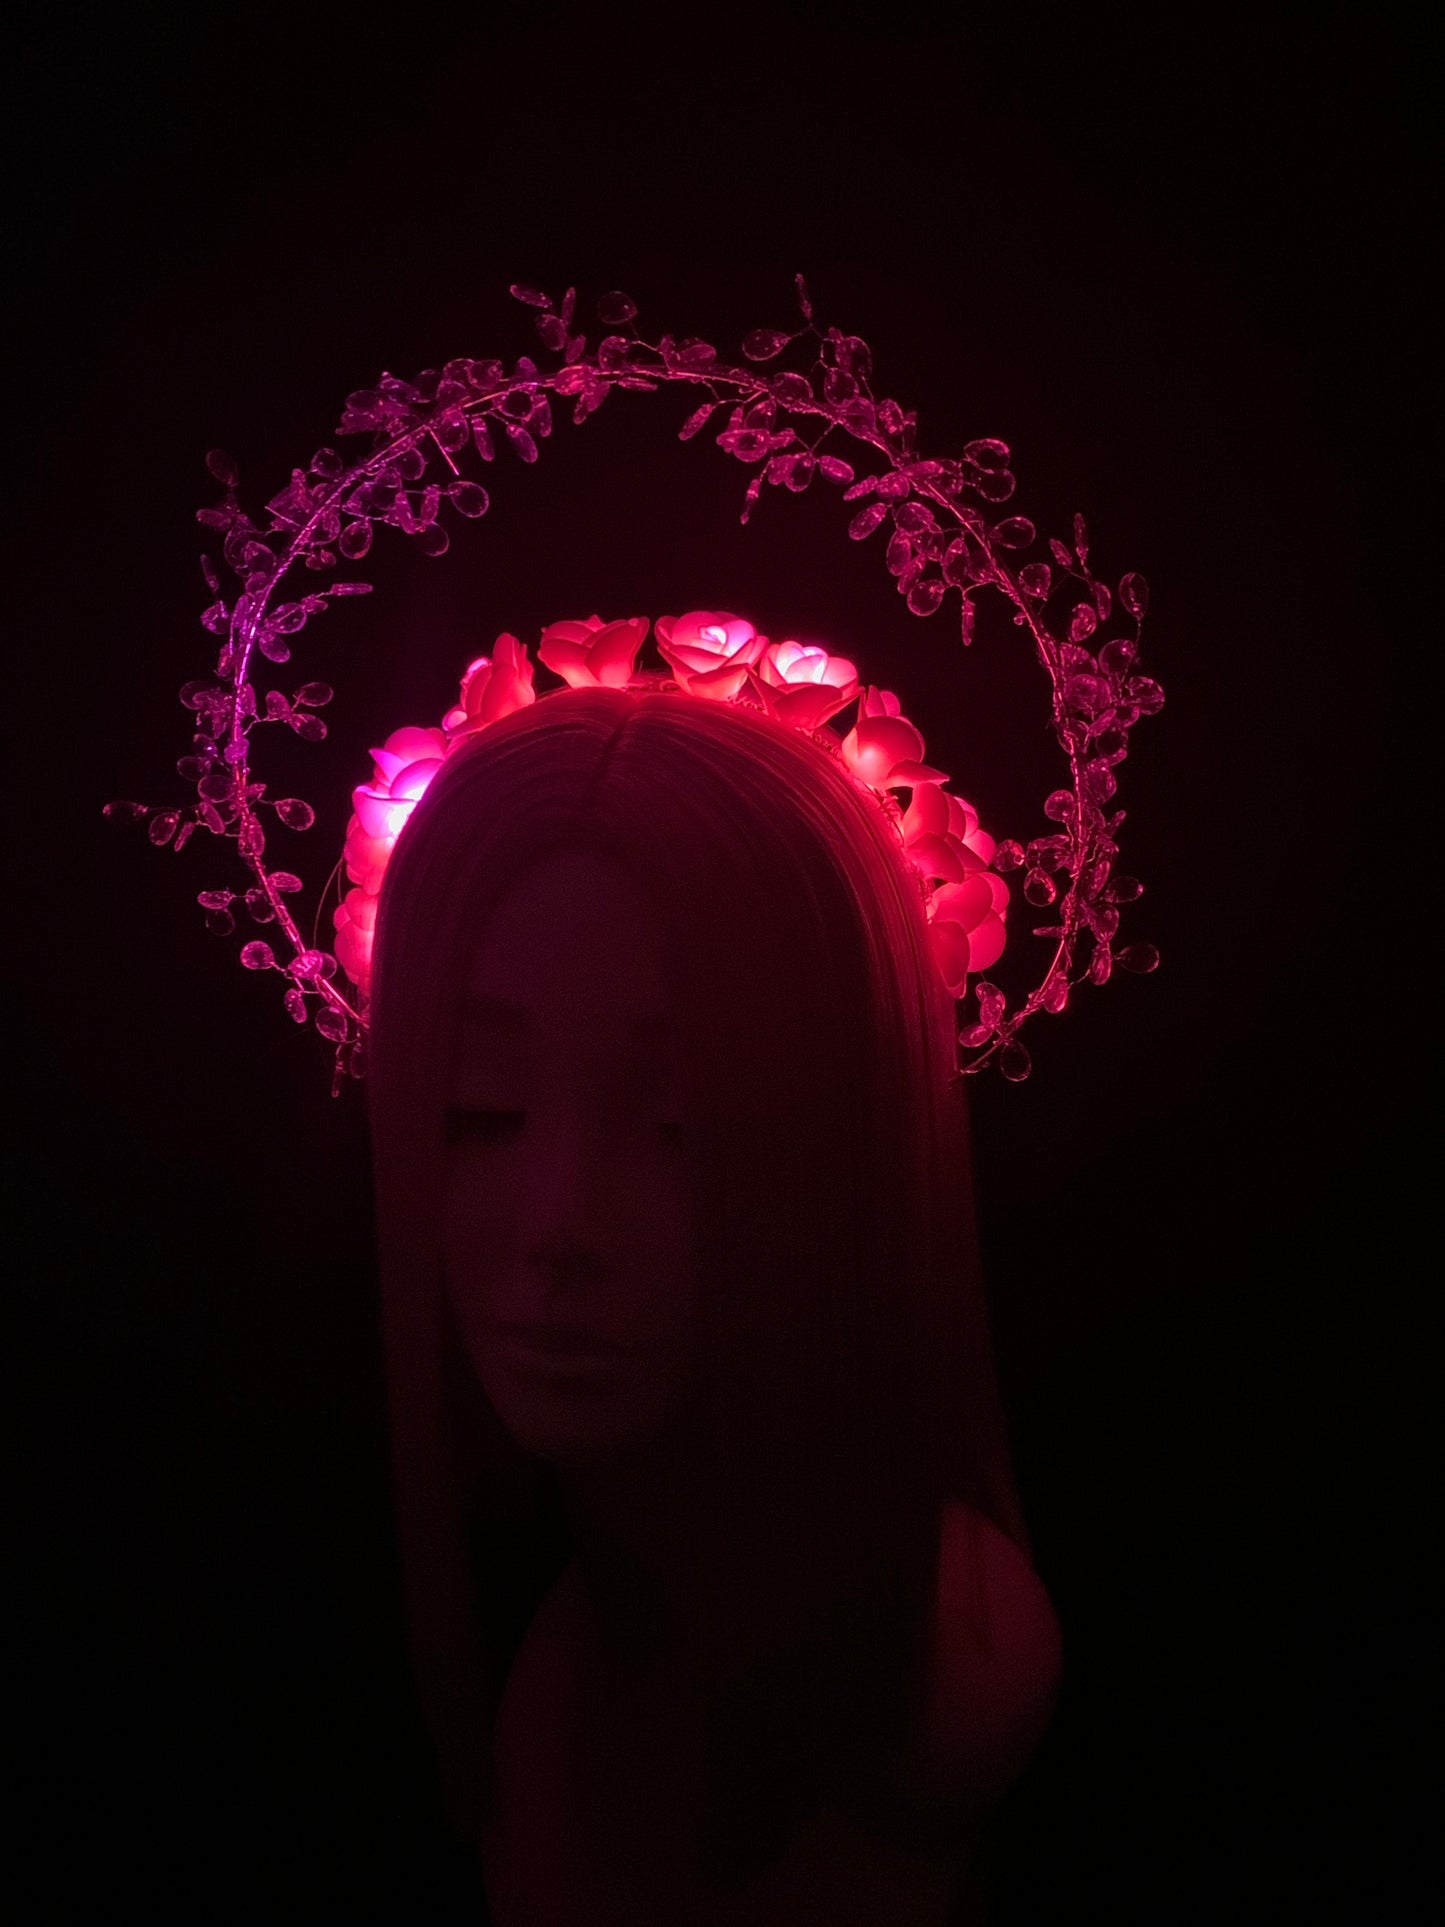 Crystal Branches Glowing Pink Roses Halo Crown